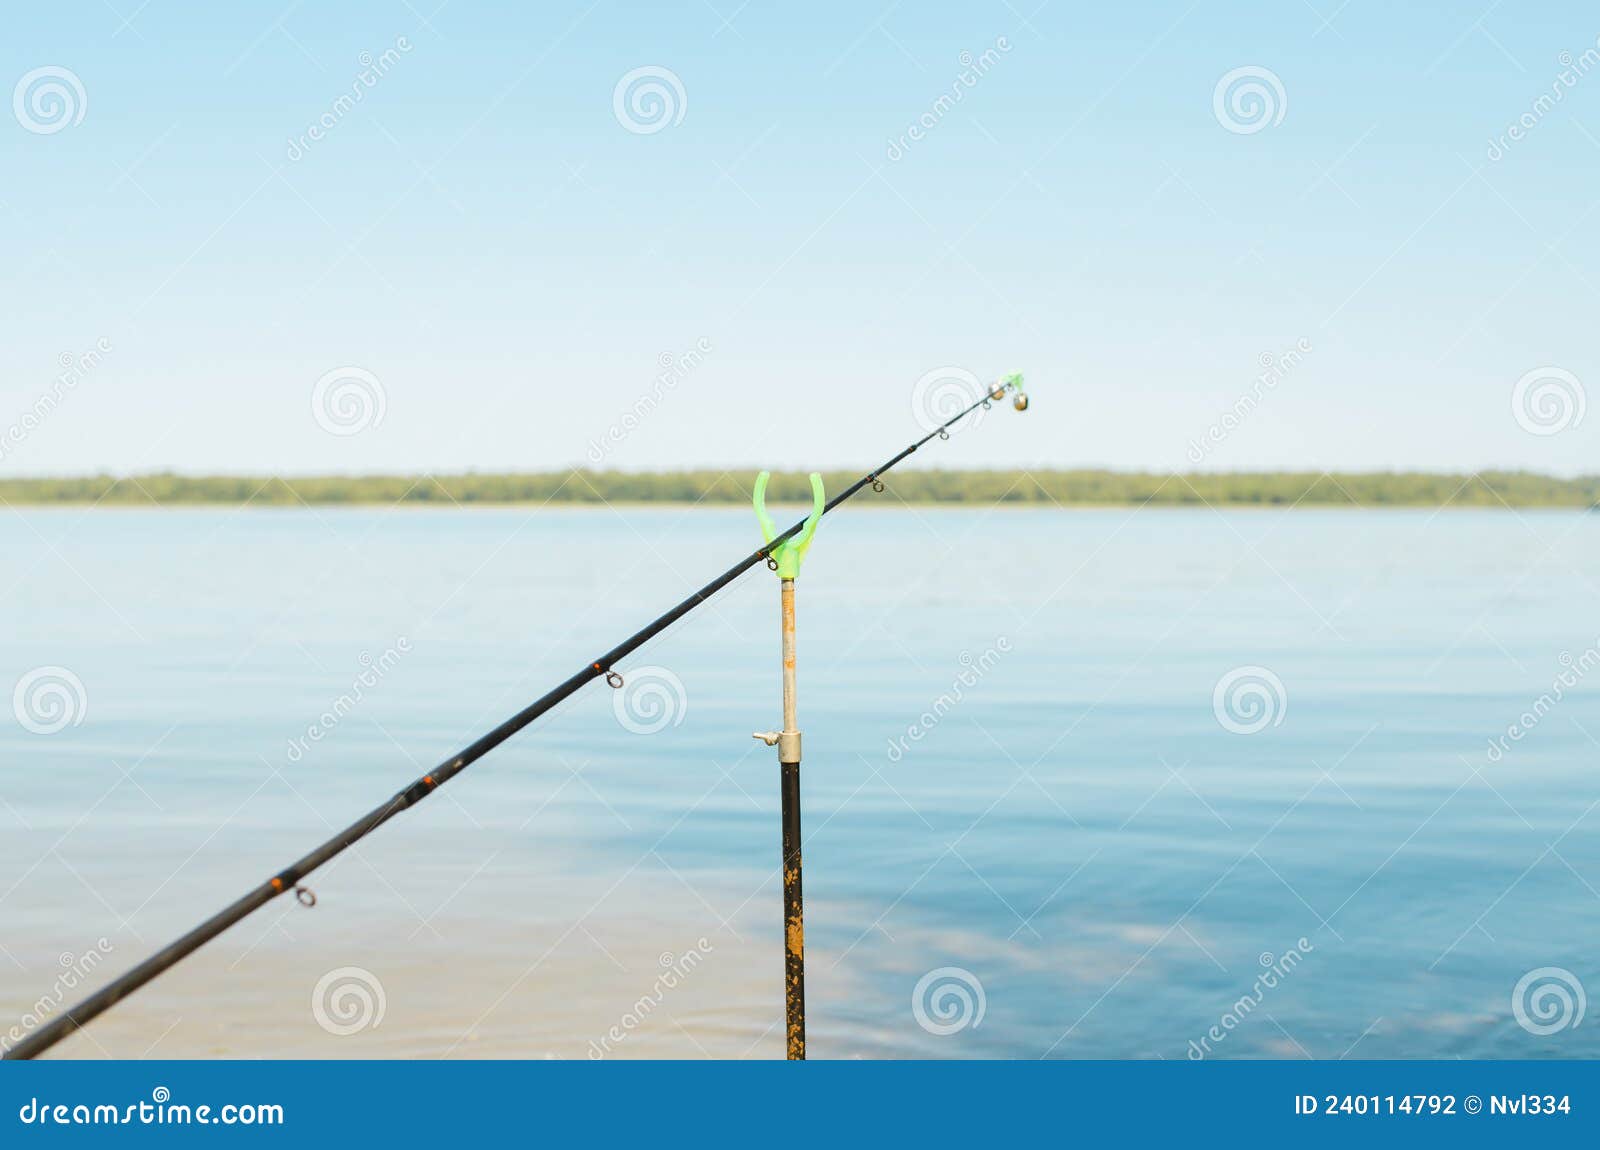 https://thumbs.dreamstime.com/z/close-up-fishing-rod-bell-stand-lake-outdoors-summer-selective-focus-240114792.jpg